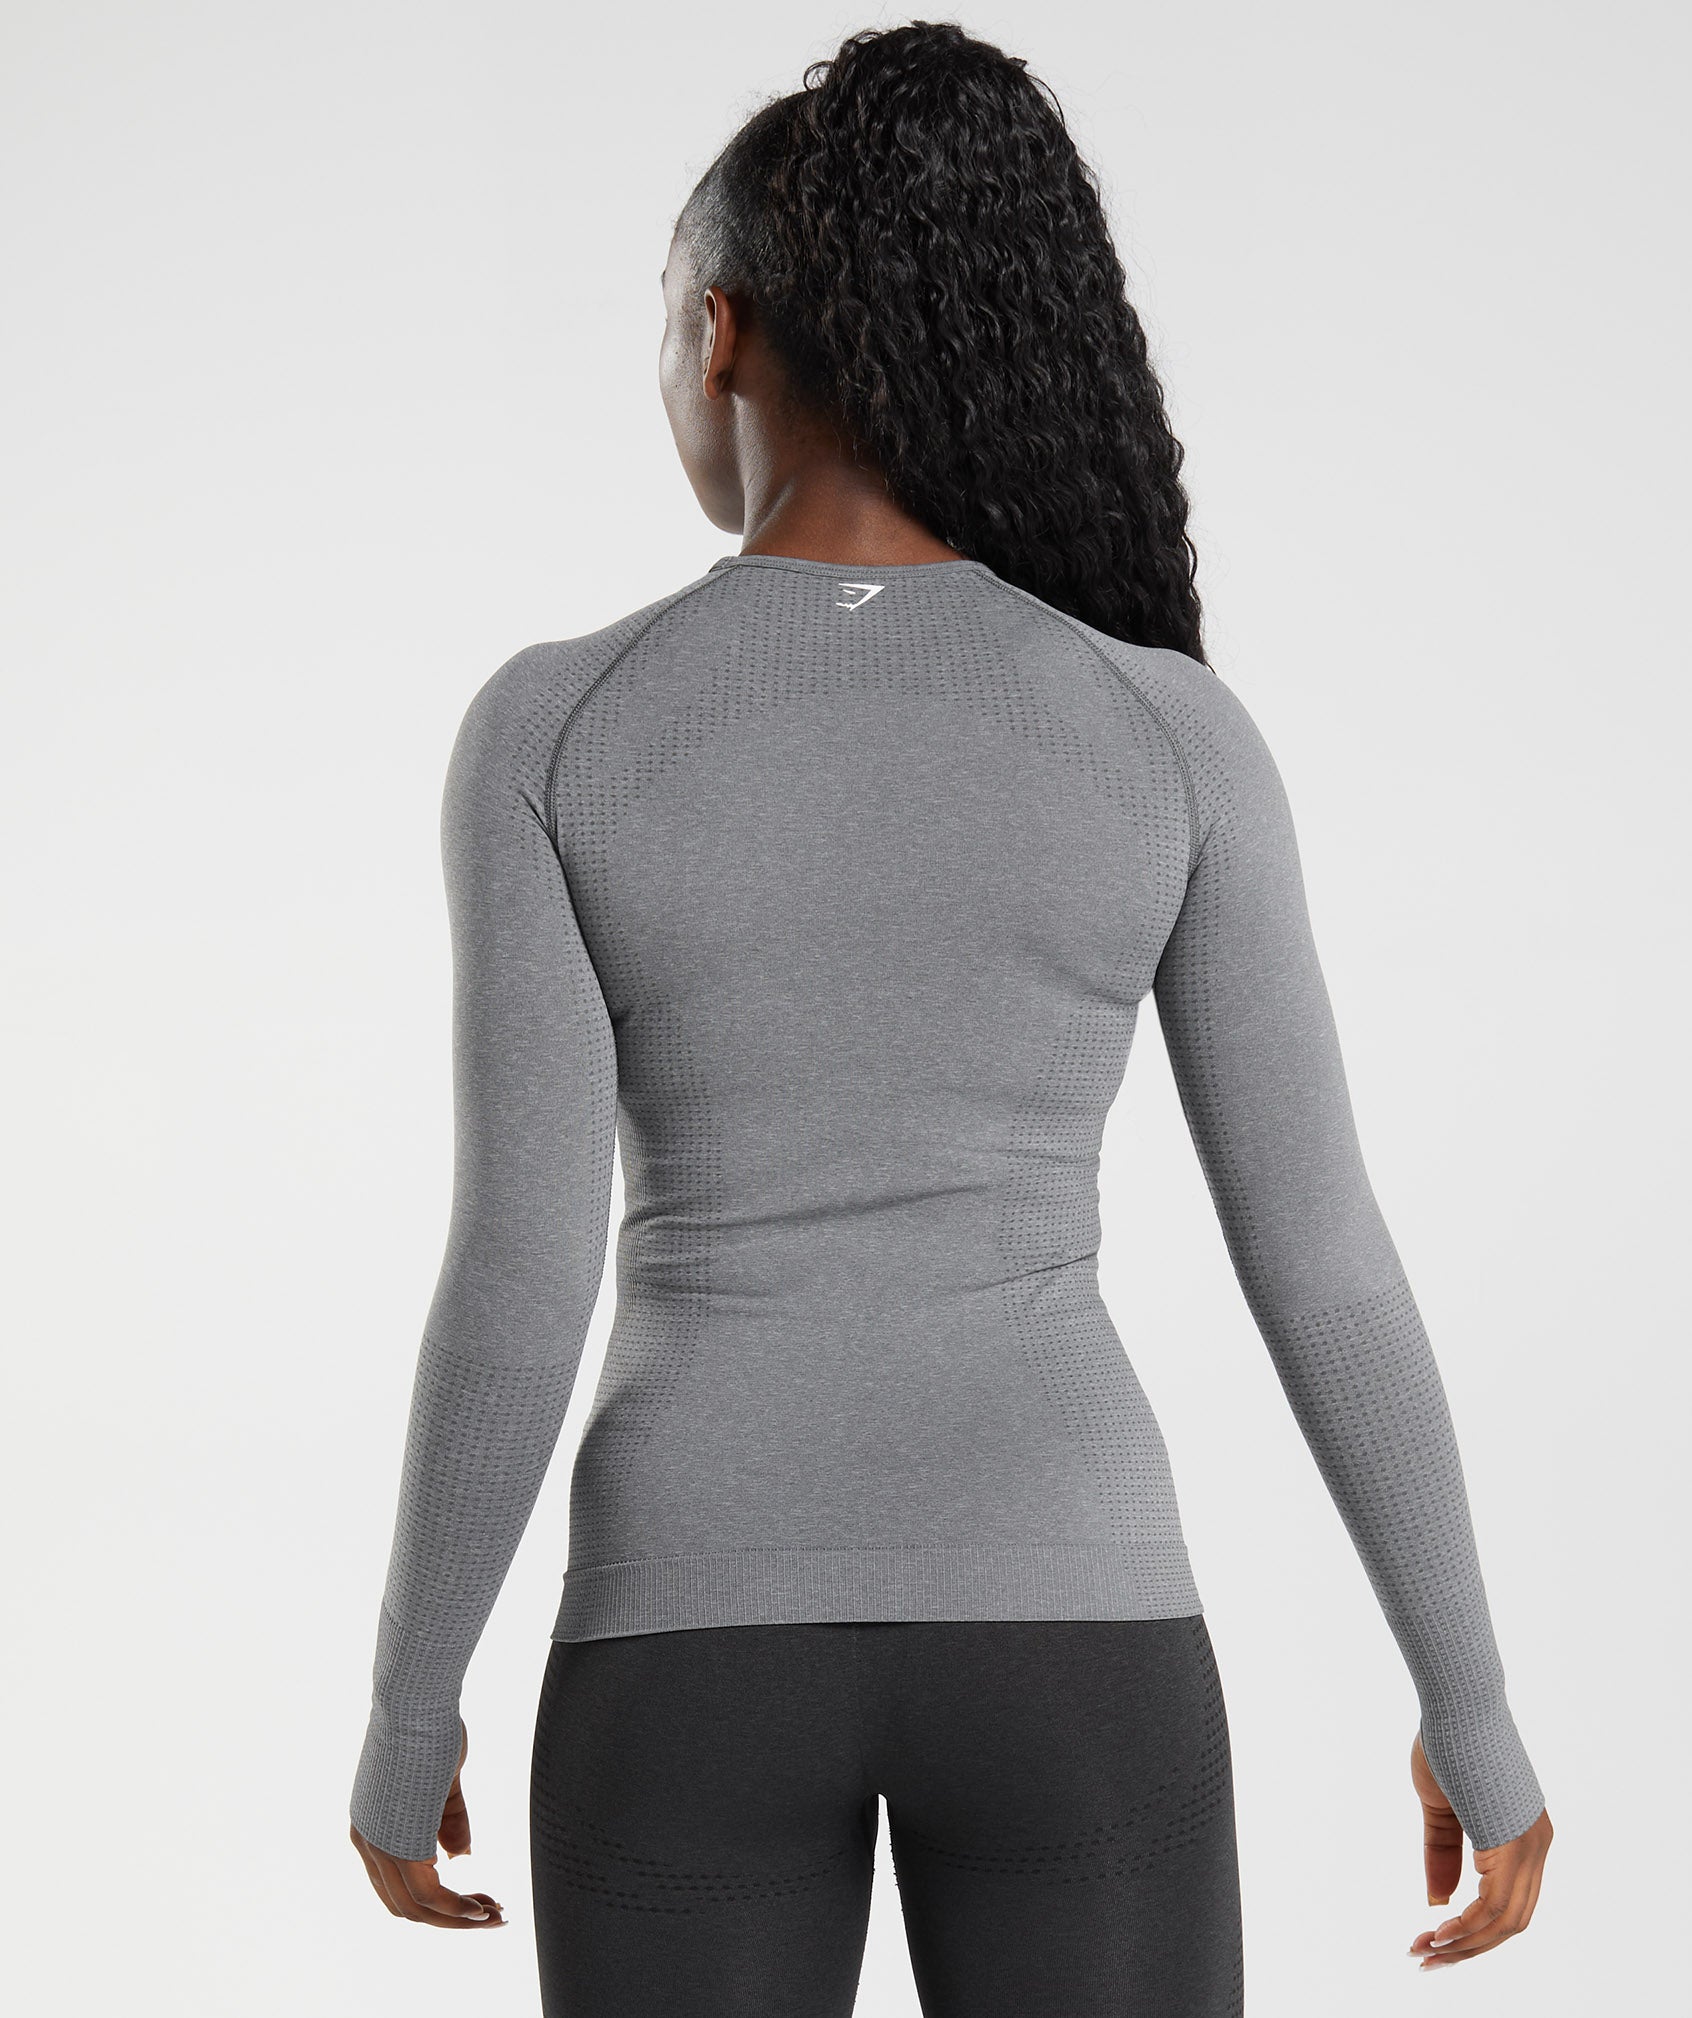 SEAMLESS 2.0 Long sleeve CHARCOAL – Knockout Nutrition